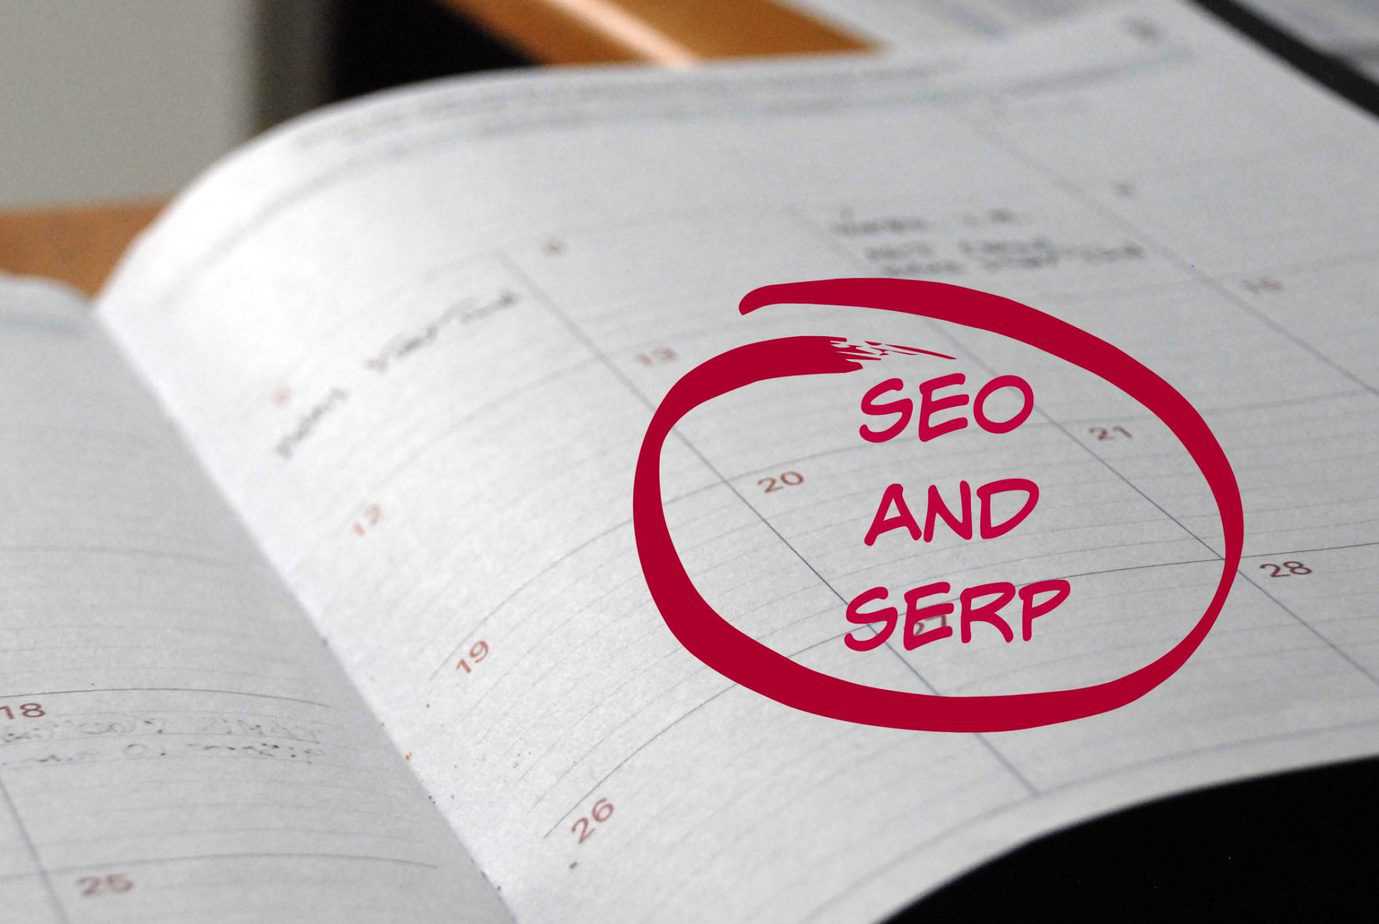 Content marketing SEO and SERP for beginners